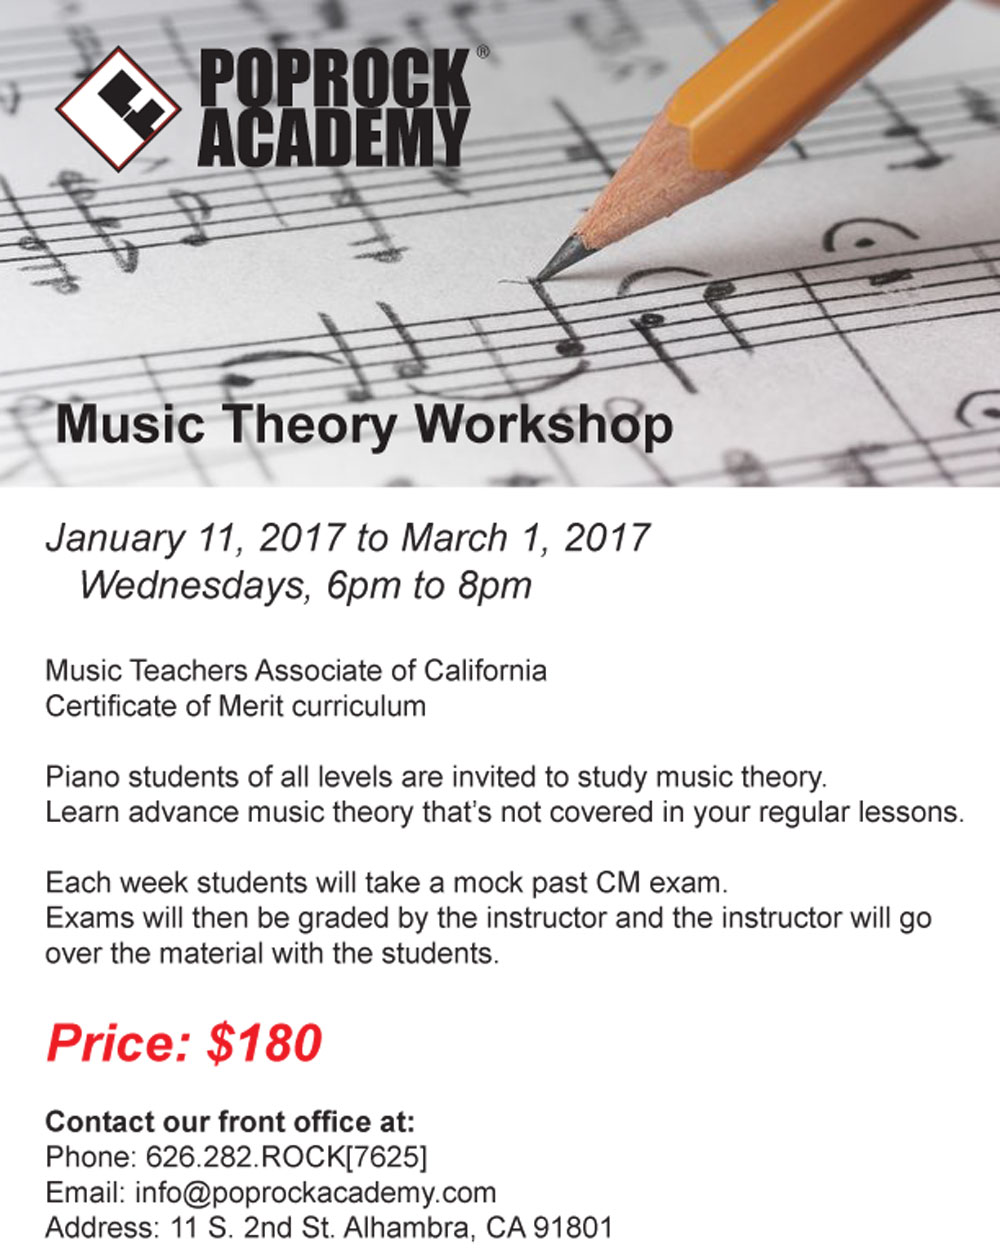 Music Theory Class in alhambra, CA 